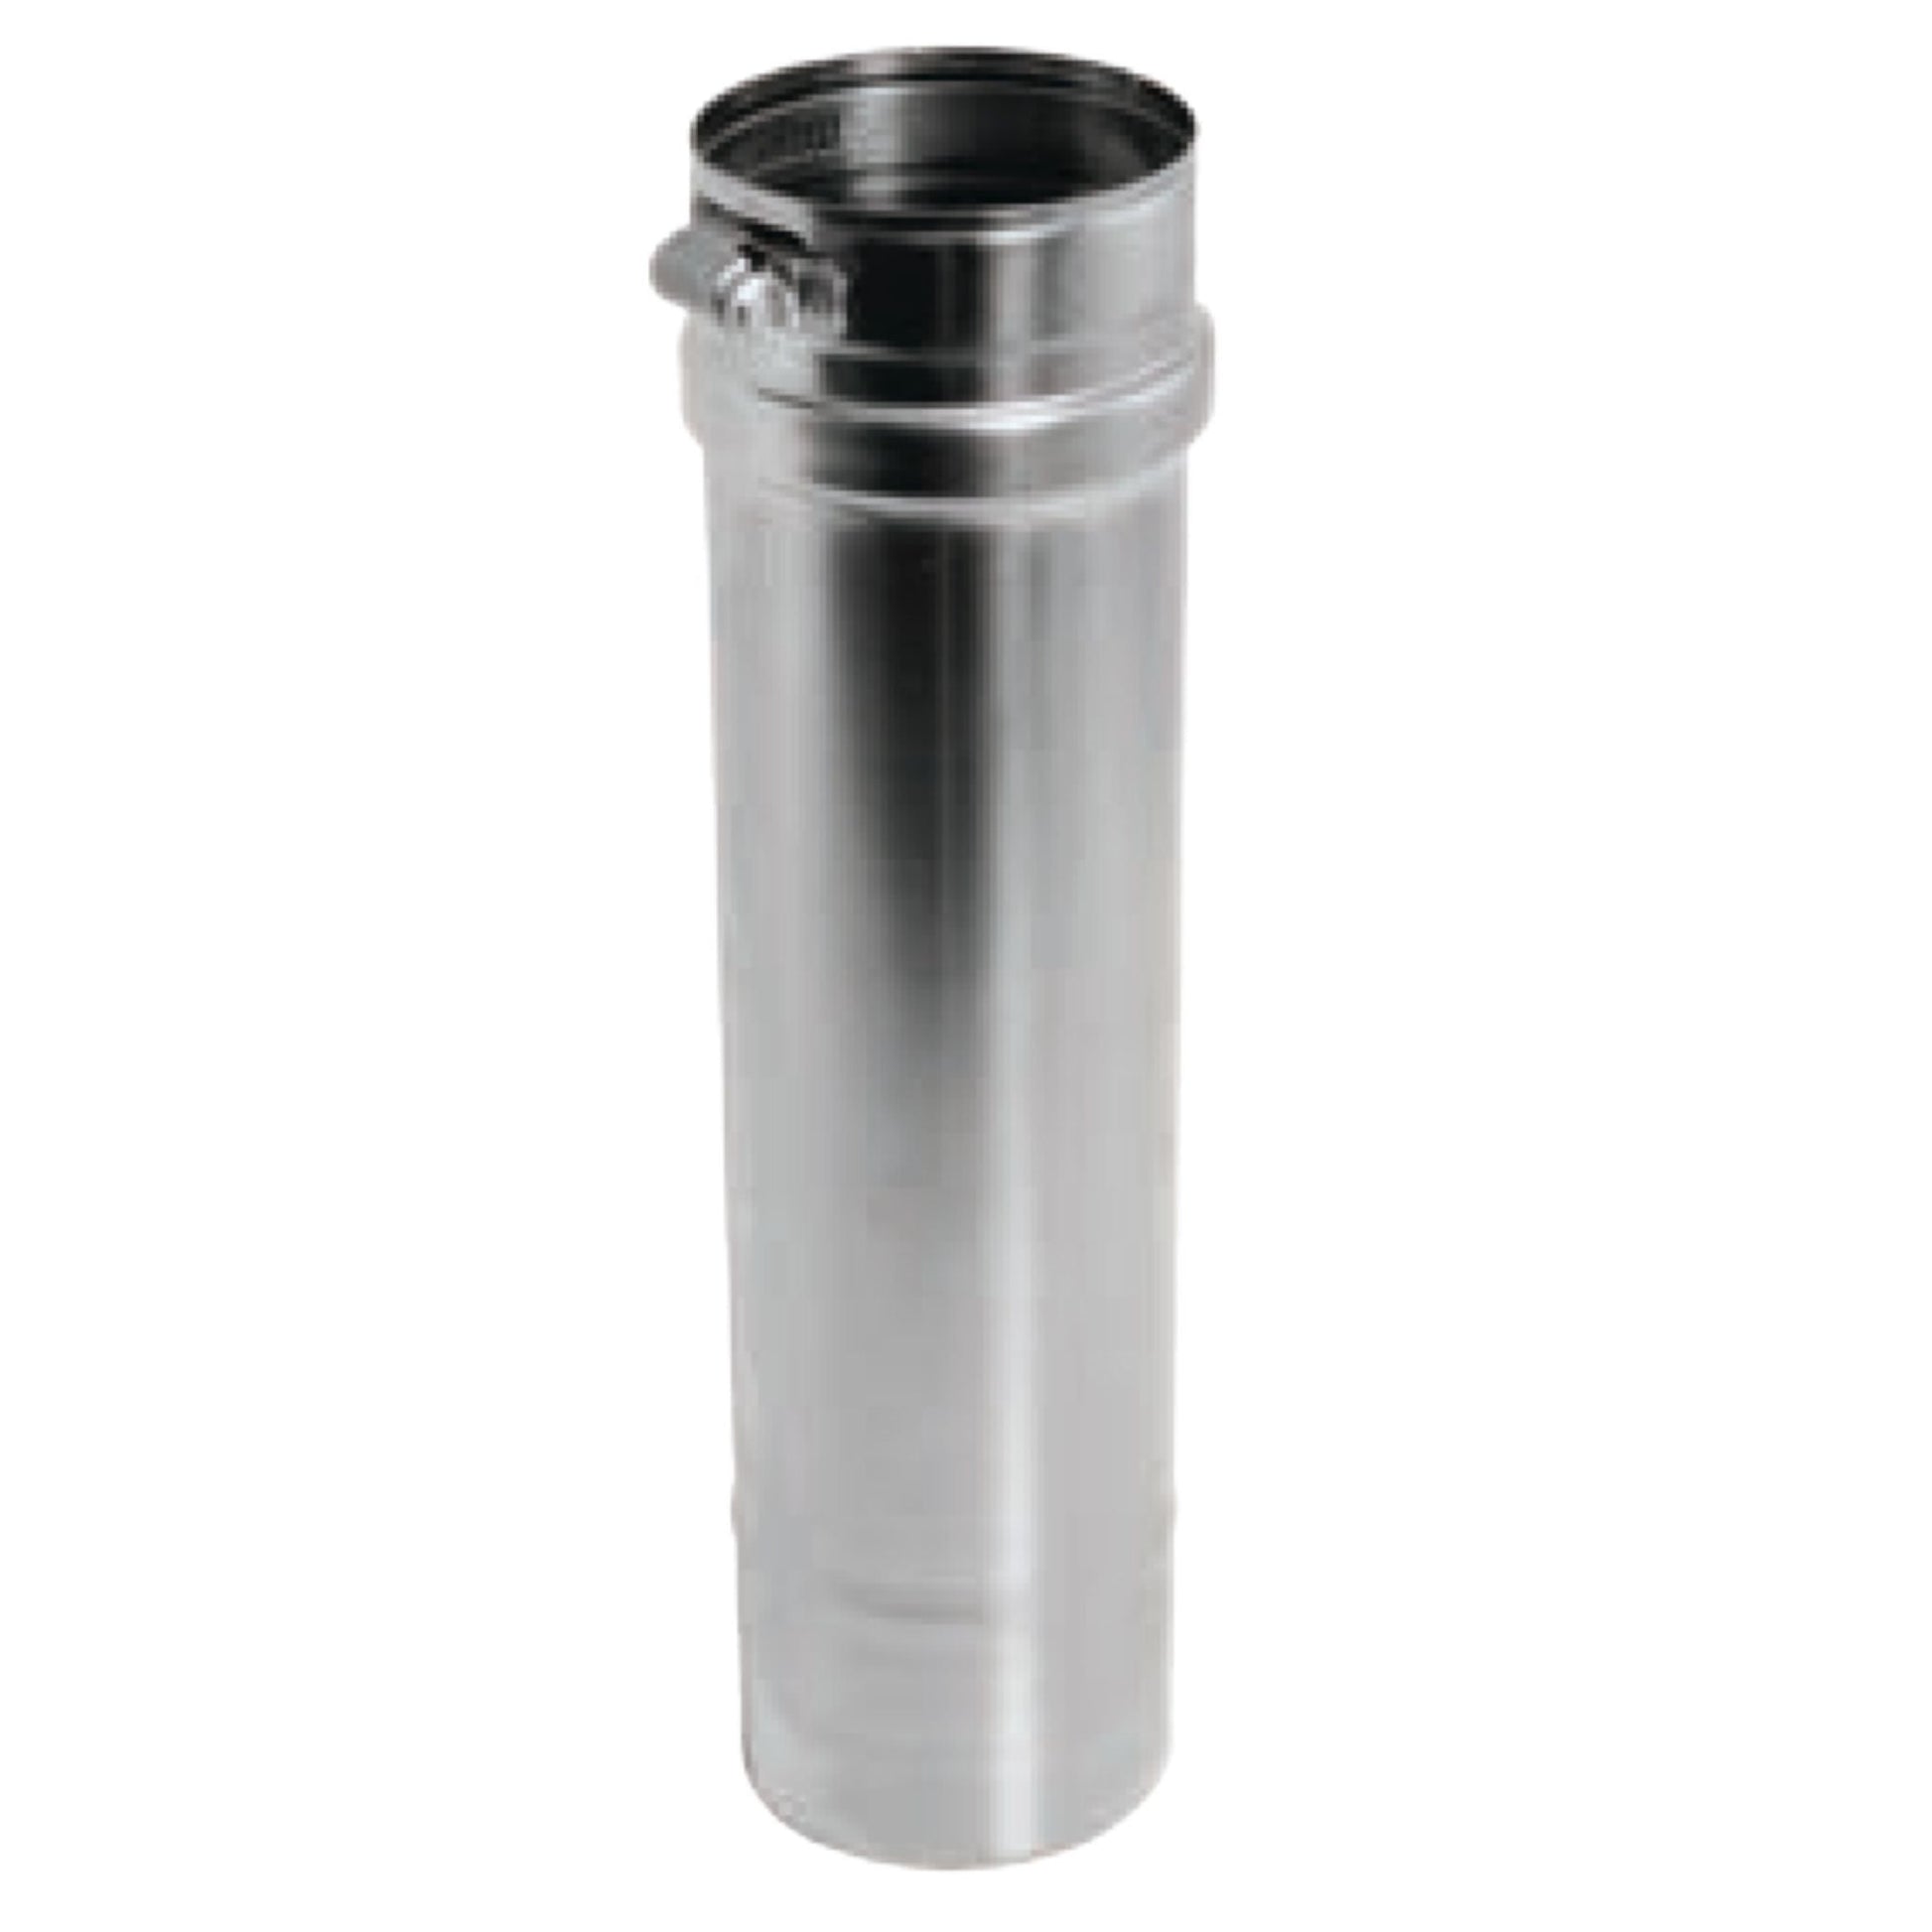 DuraVent FasNSeal 6" x 6" 316L Stainless Steel Vent Length